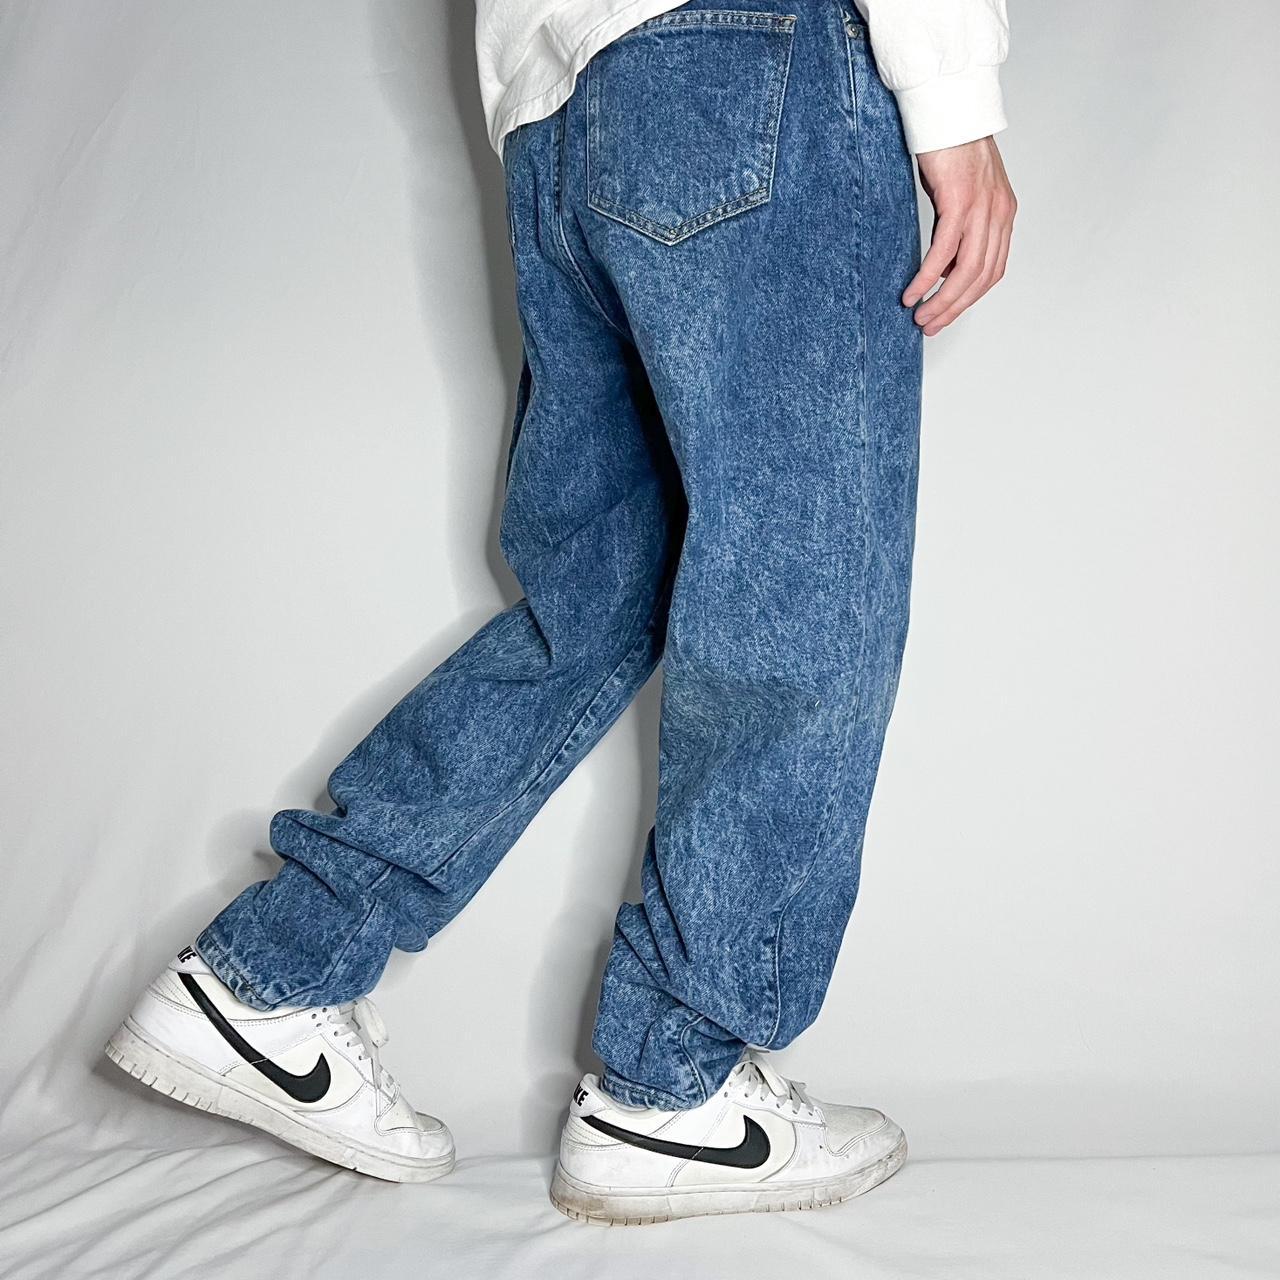 Product Image 3 - Vintage Sasson Jeans

- Great Condition!
-